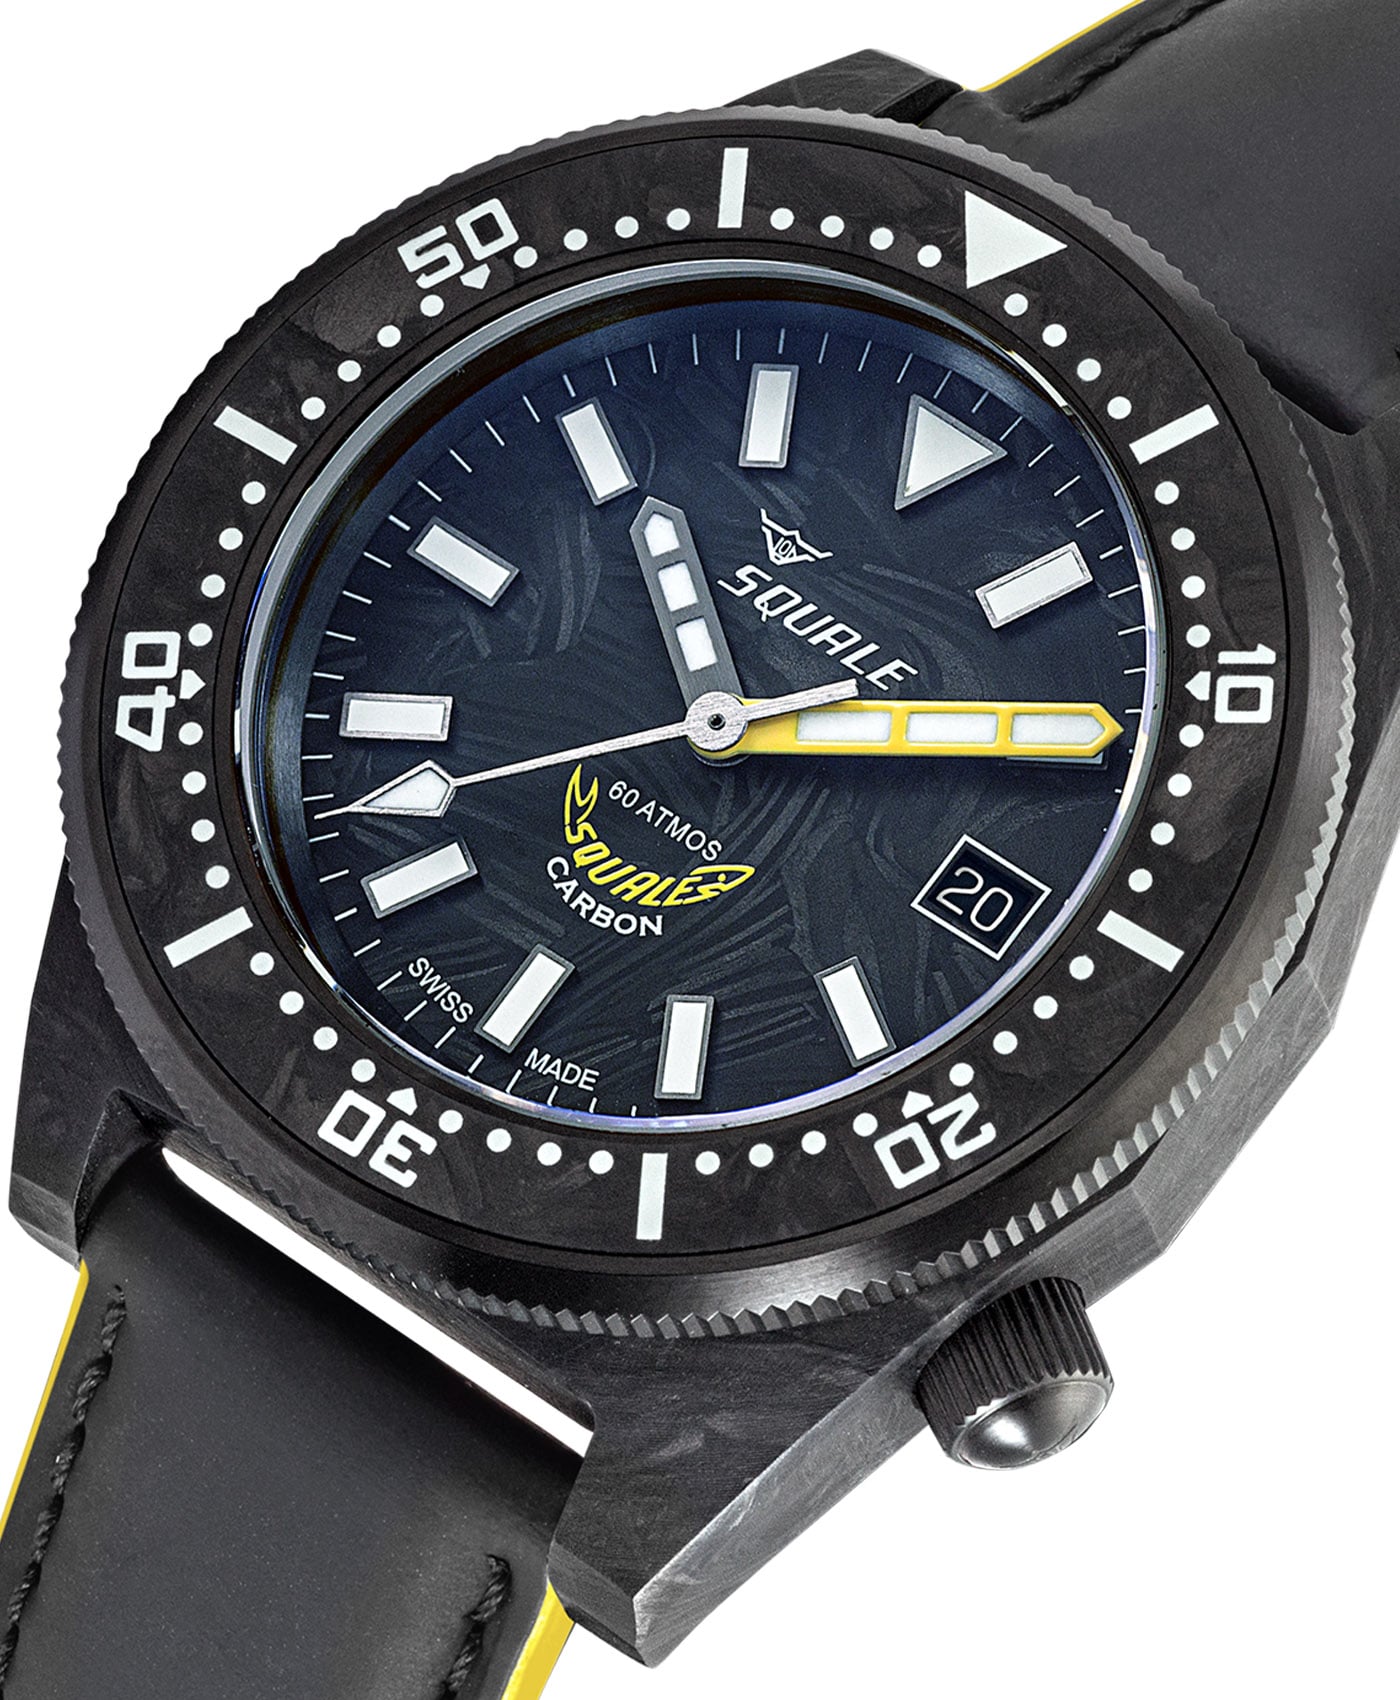 Squale - 60 ATM - T-183 Forged Carbon - Yellow-close up-min